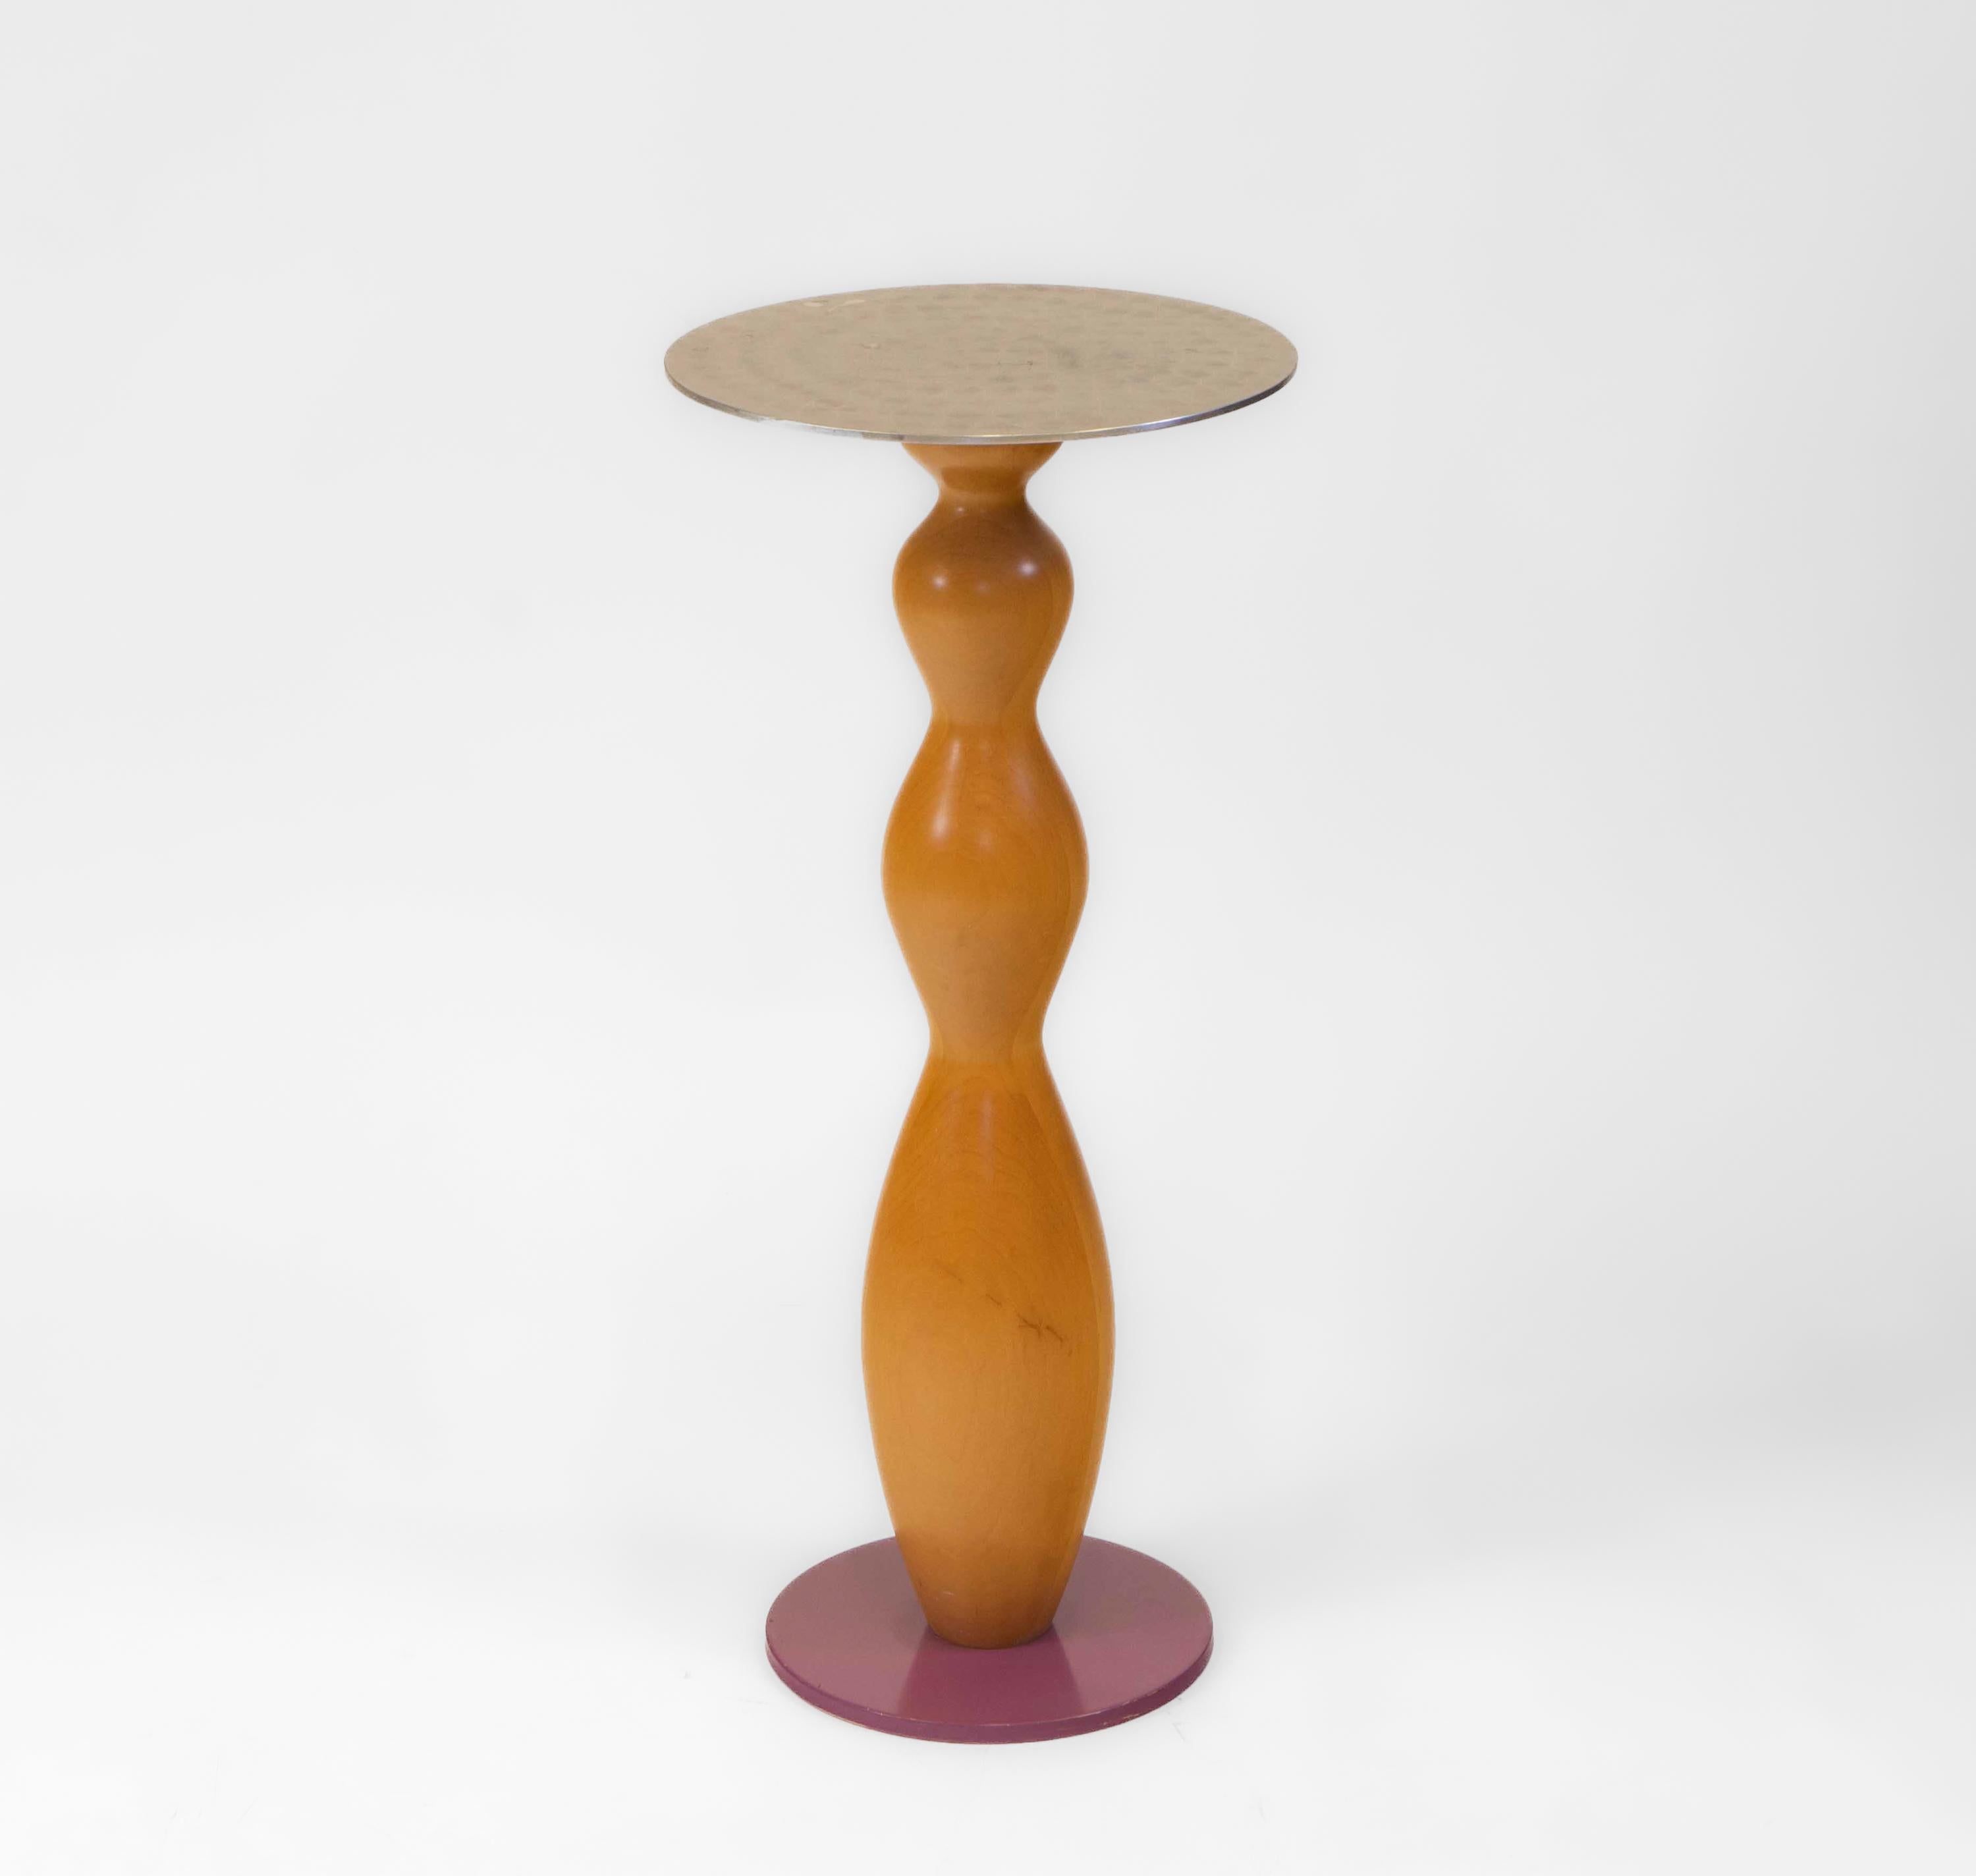  Memphis Milano Cleopatra Side Table Pedestal Designed By Marco Zanuso Jr 1987 In Good Condition For Sale In Norwich, GB